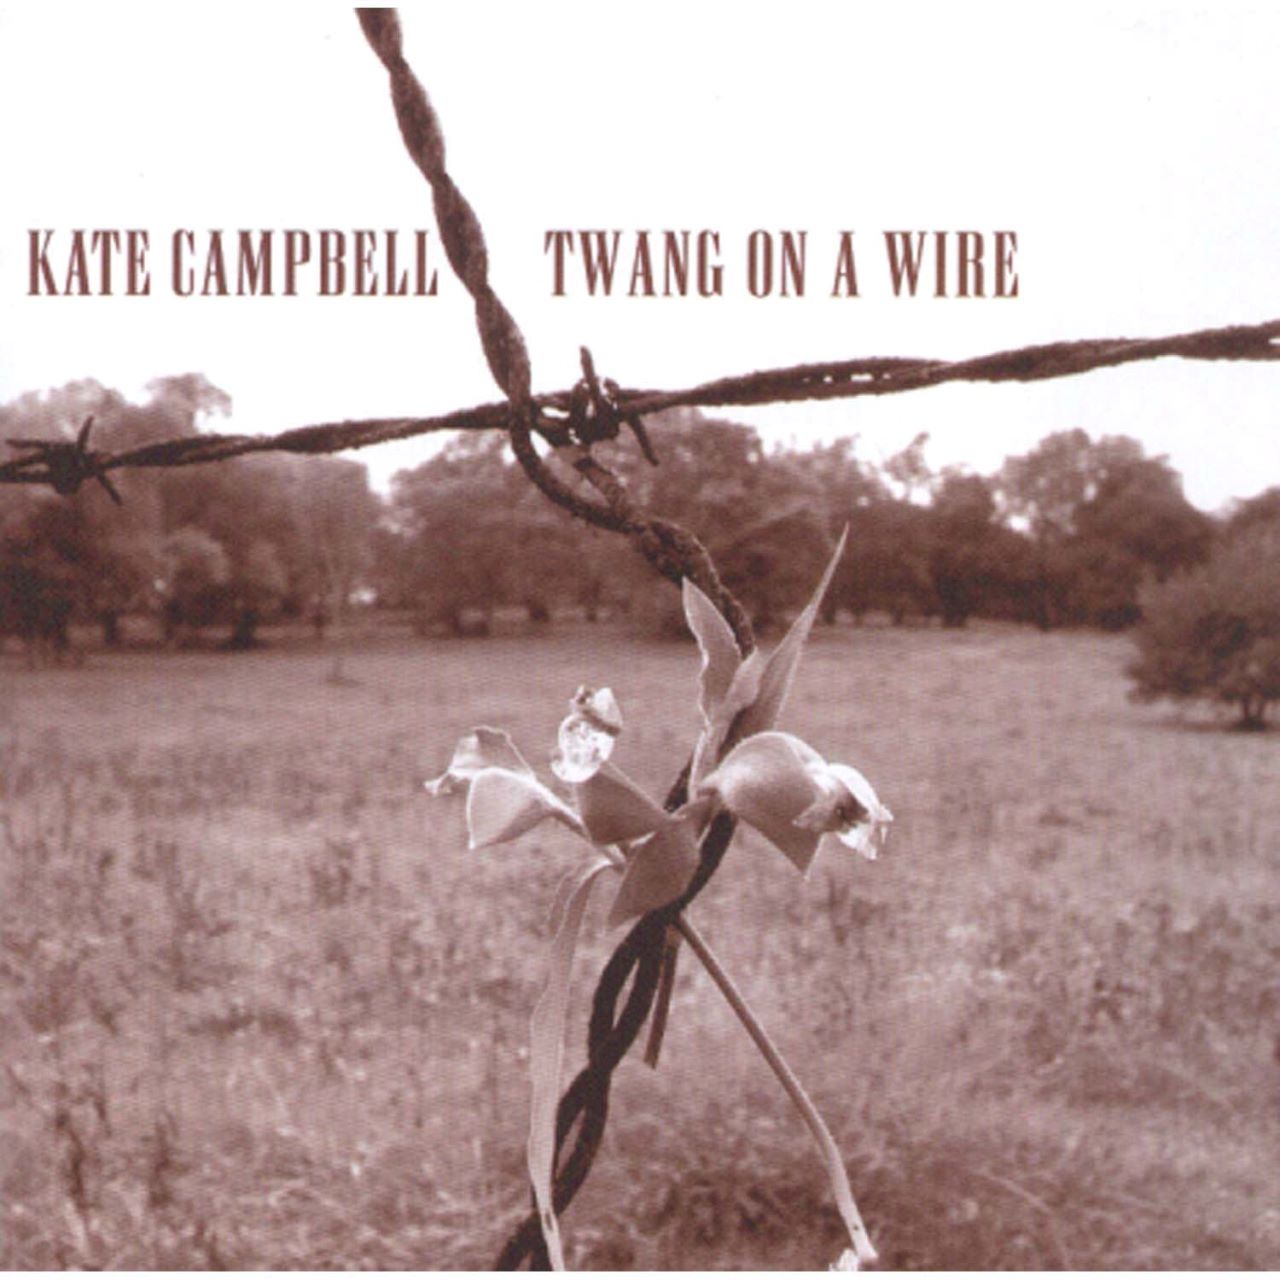 Kate Campbell - Twang On A Wire cover album